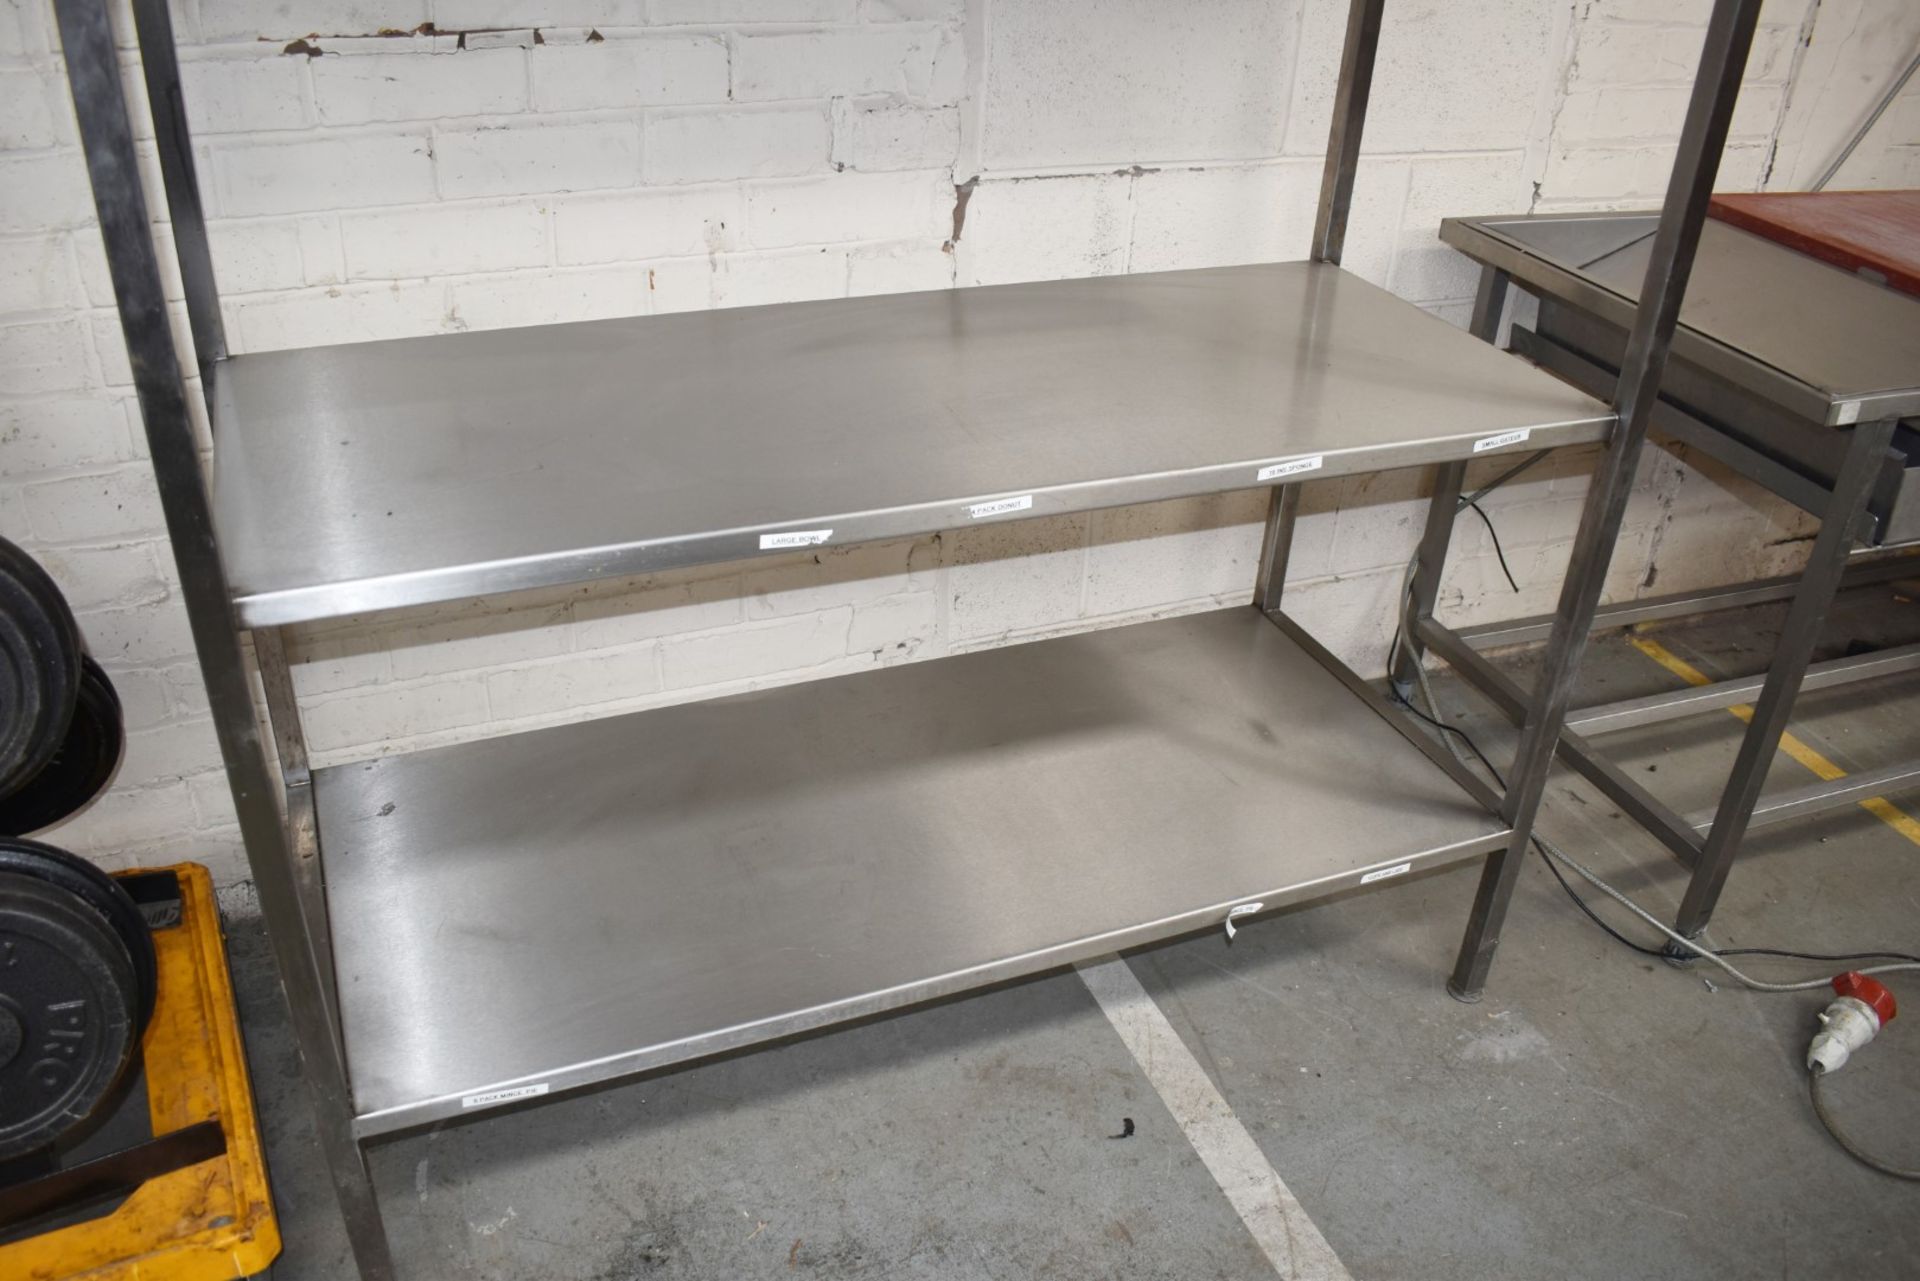 1 x Stainless Steel Commercial Kitchen 3 Tier Shelf Unit - Dimensions: H188 x W140 x D60 cms - - Image 2 of 4